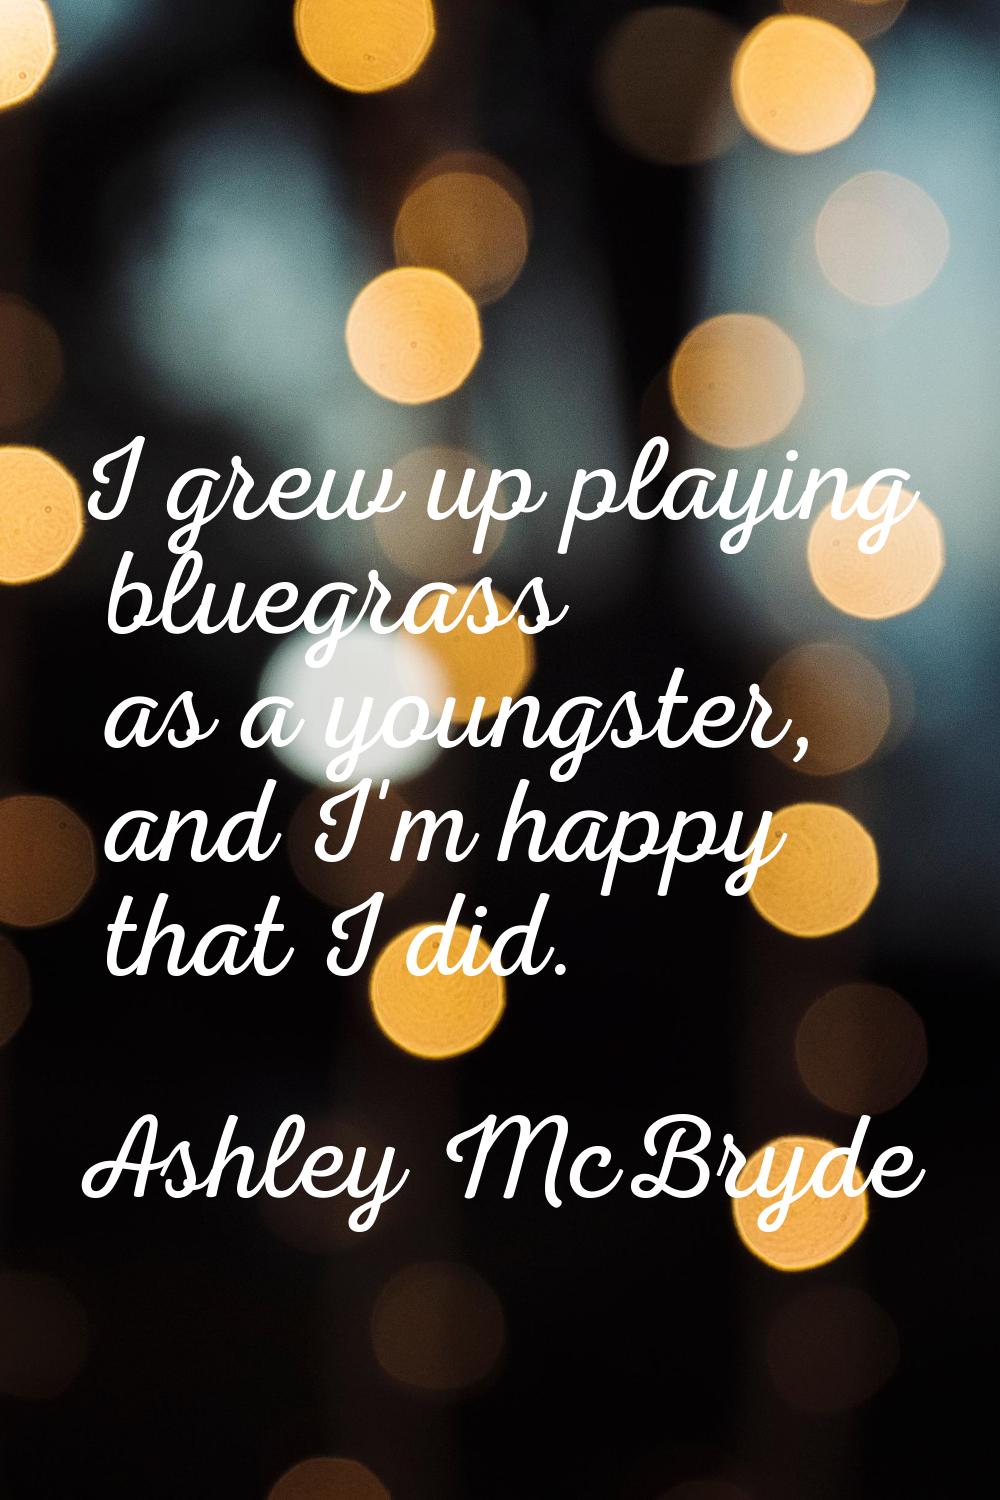 I grew up playing bluegrass as a youngster, and I'm happy that I did.